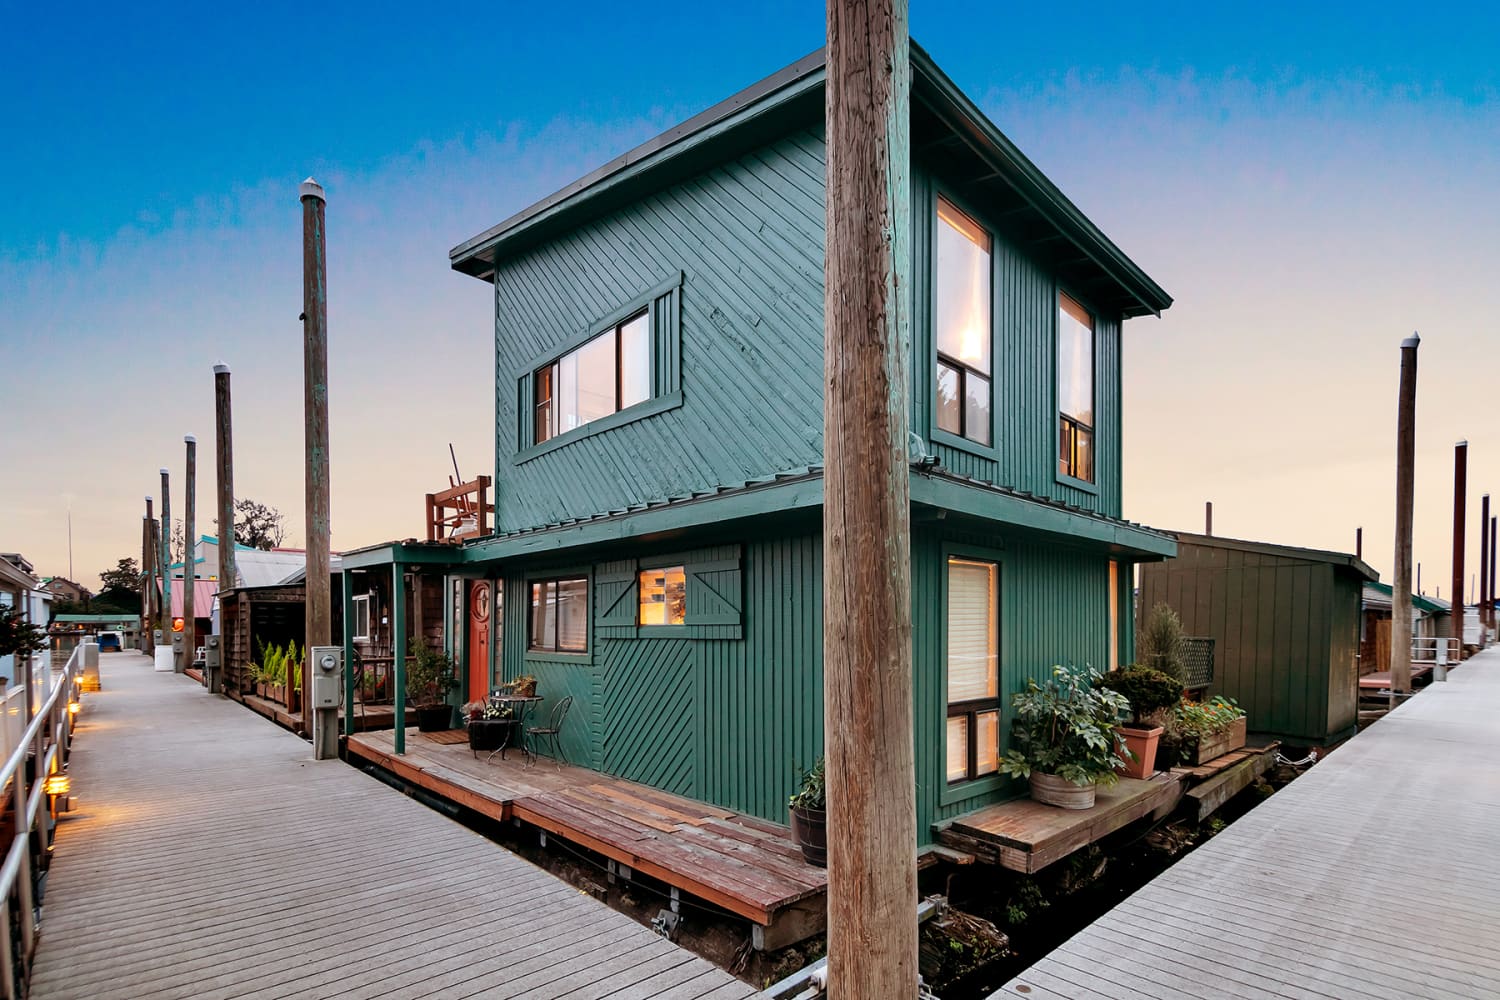 This Absolutely Alluring Floating Home is on the Market in Portland, Oregon, for Under $300K